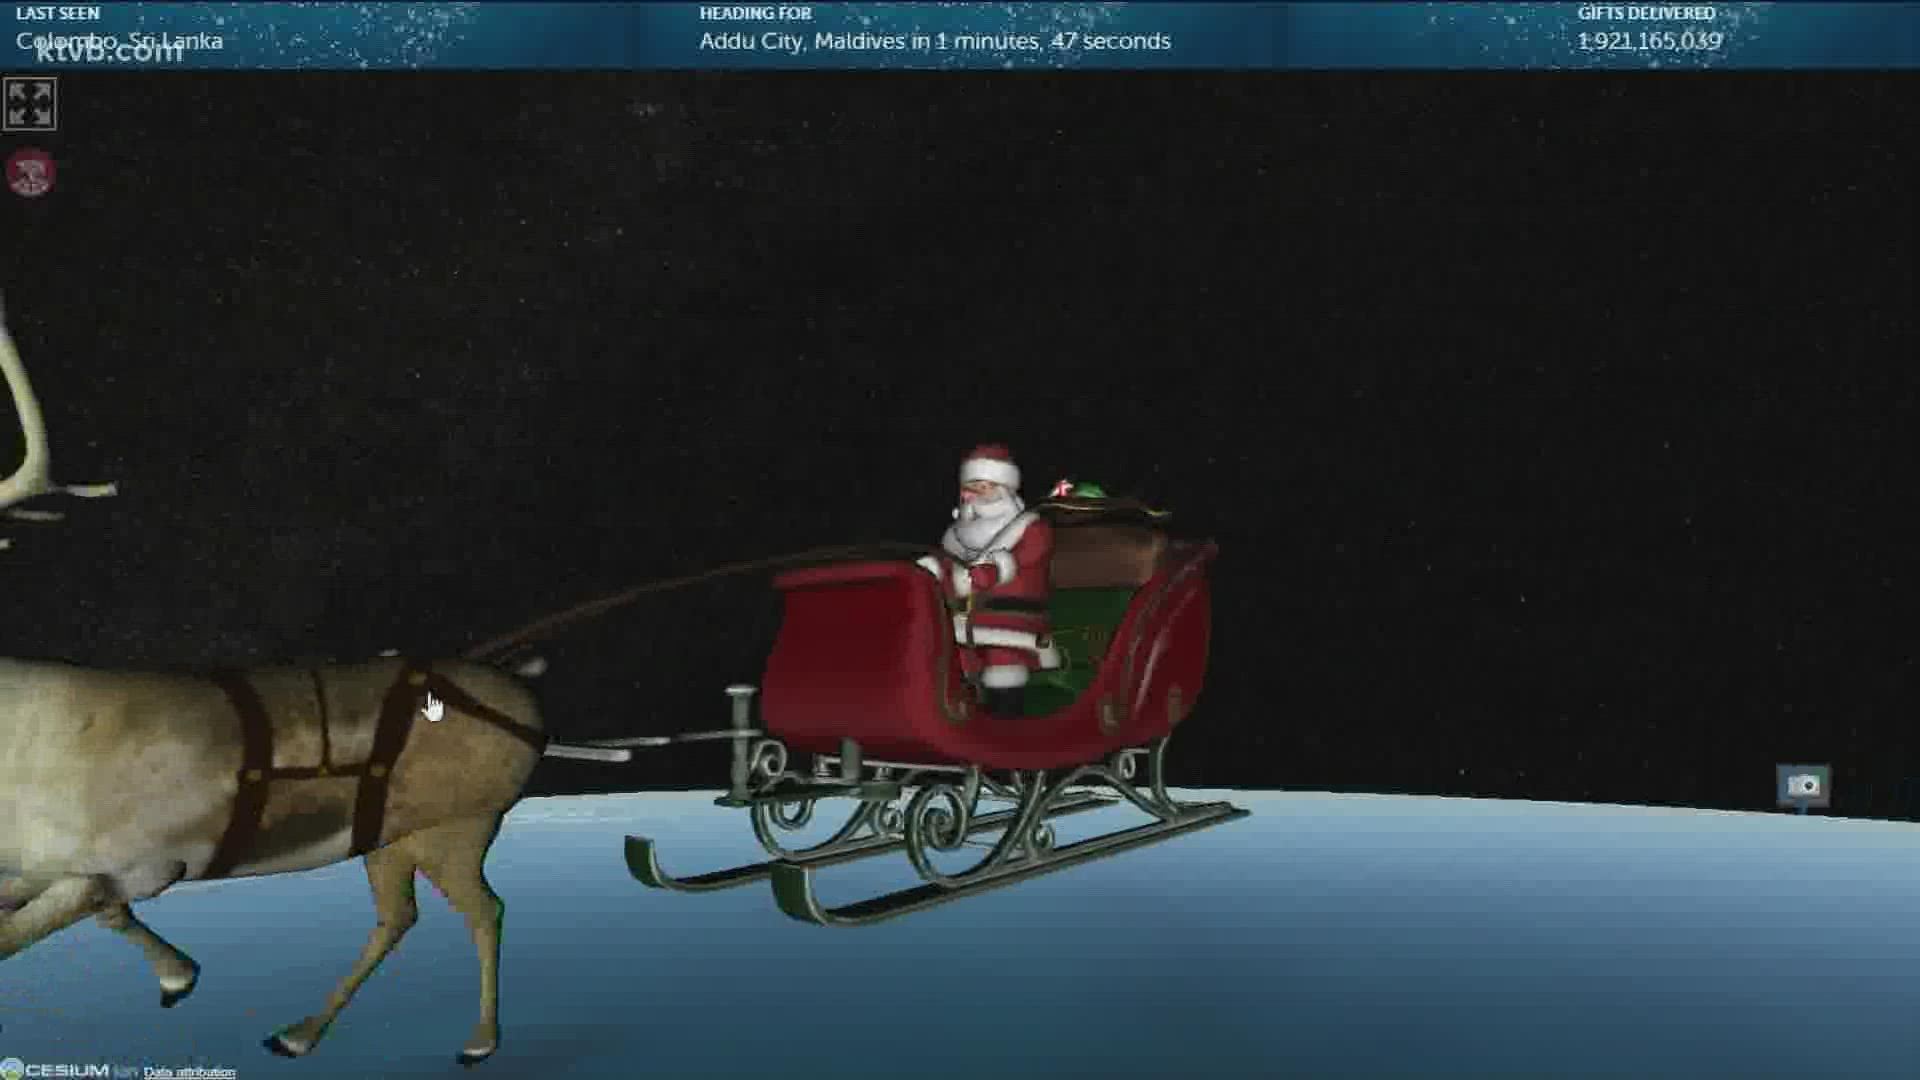 NORAD has been tracking Santa's present deliveries with its Santa tracker for 66 years.